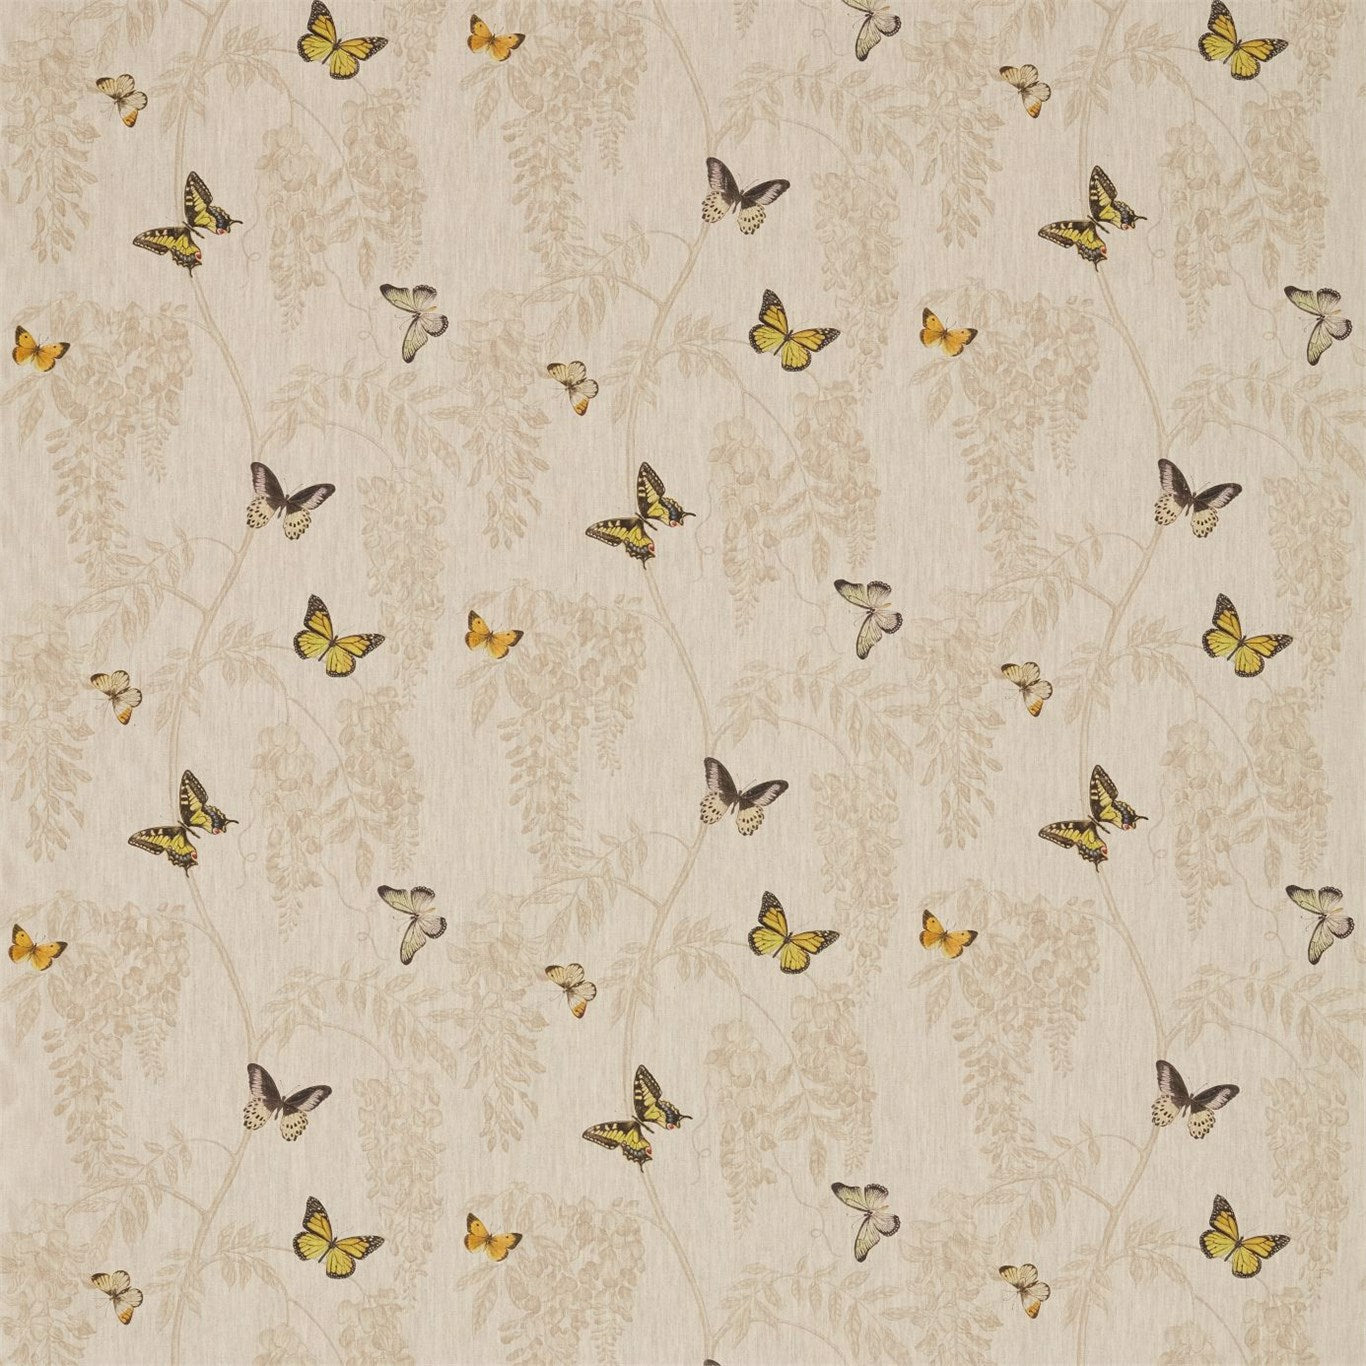 Wisteria and Butterfly Linen/Citrus Fabric By Sanderson